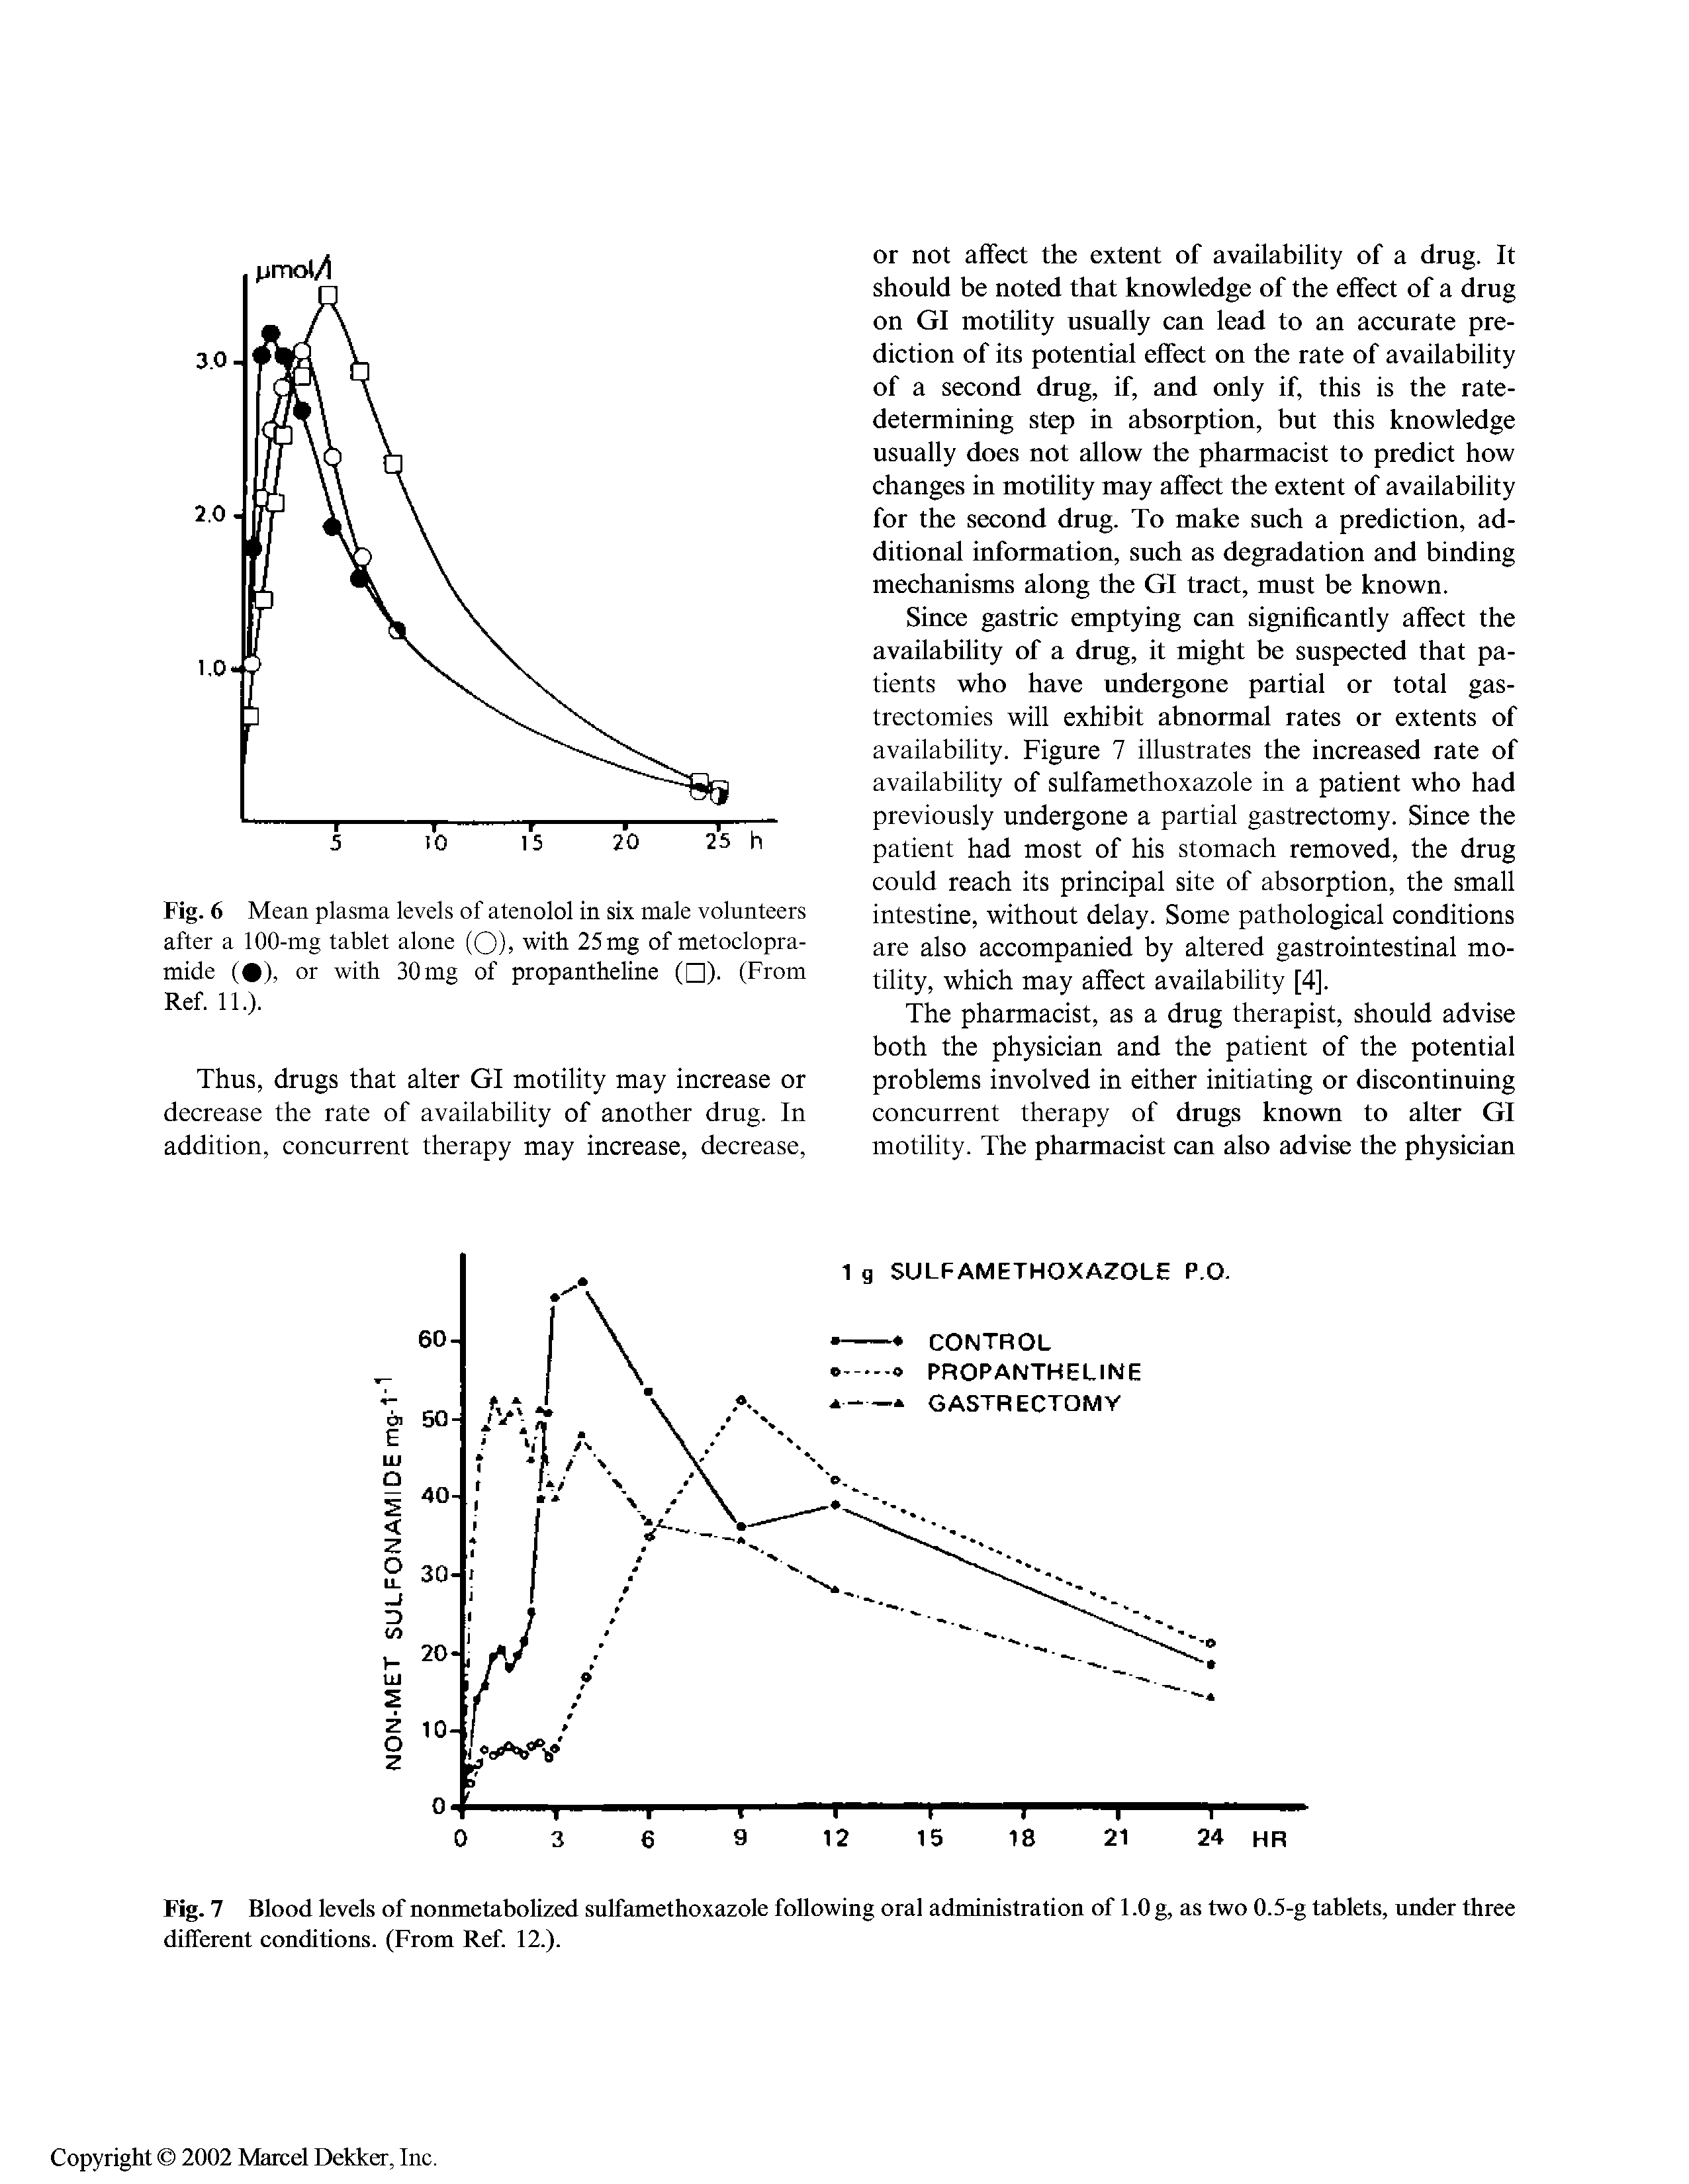 Fig. 7 Blood levels of nonmetabolized sulfamethoxazole following oral administration of 1.0 g, as two 0.5-g tablets, under three different conditions. (From Ref. 12.).